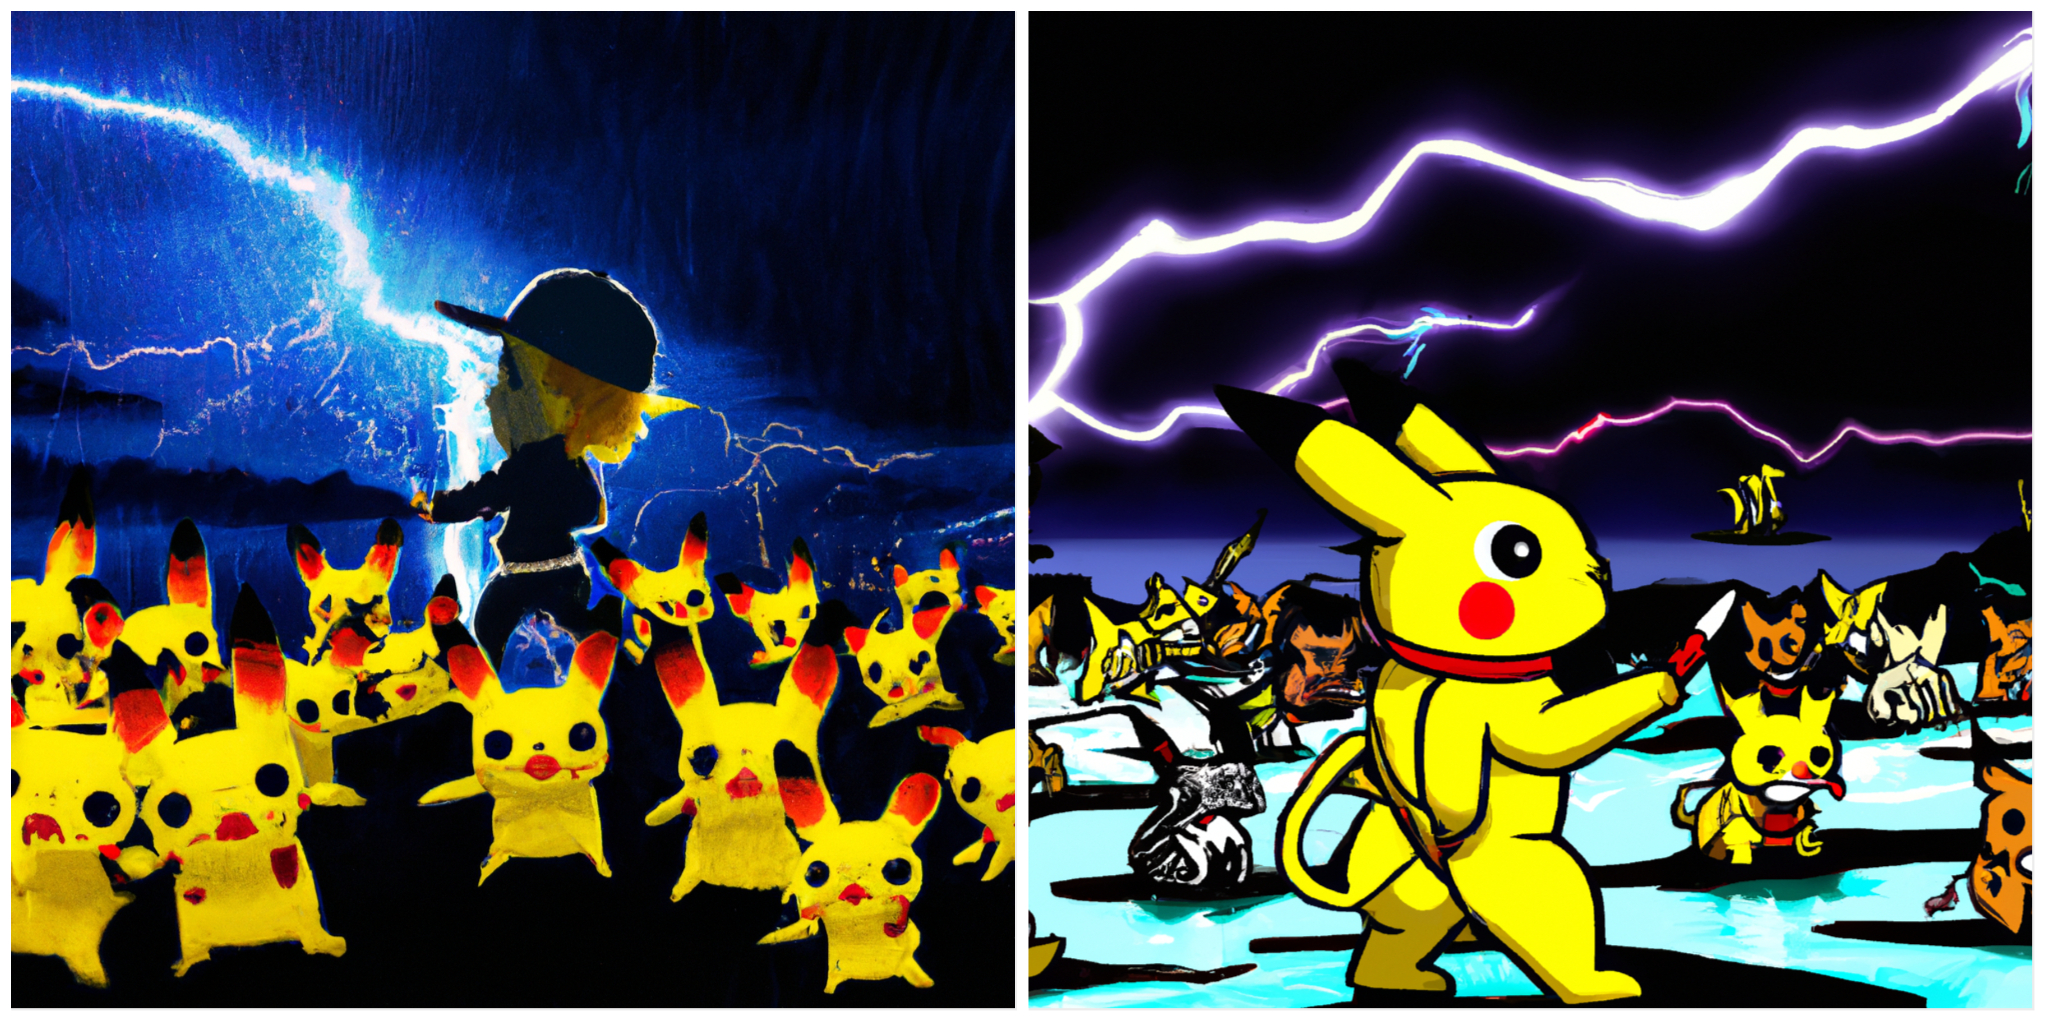 Images generated by DALL-E showing a boy wearing a hat and a crowd of yellow Pikachus under a dark sky filled with lightning. 